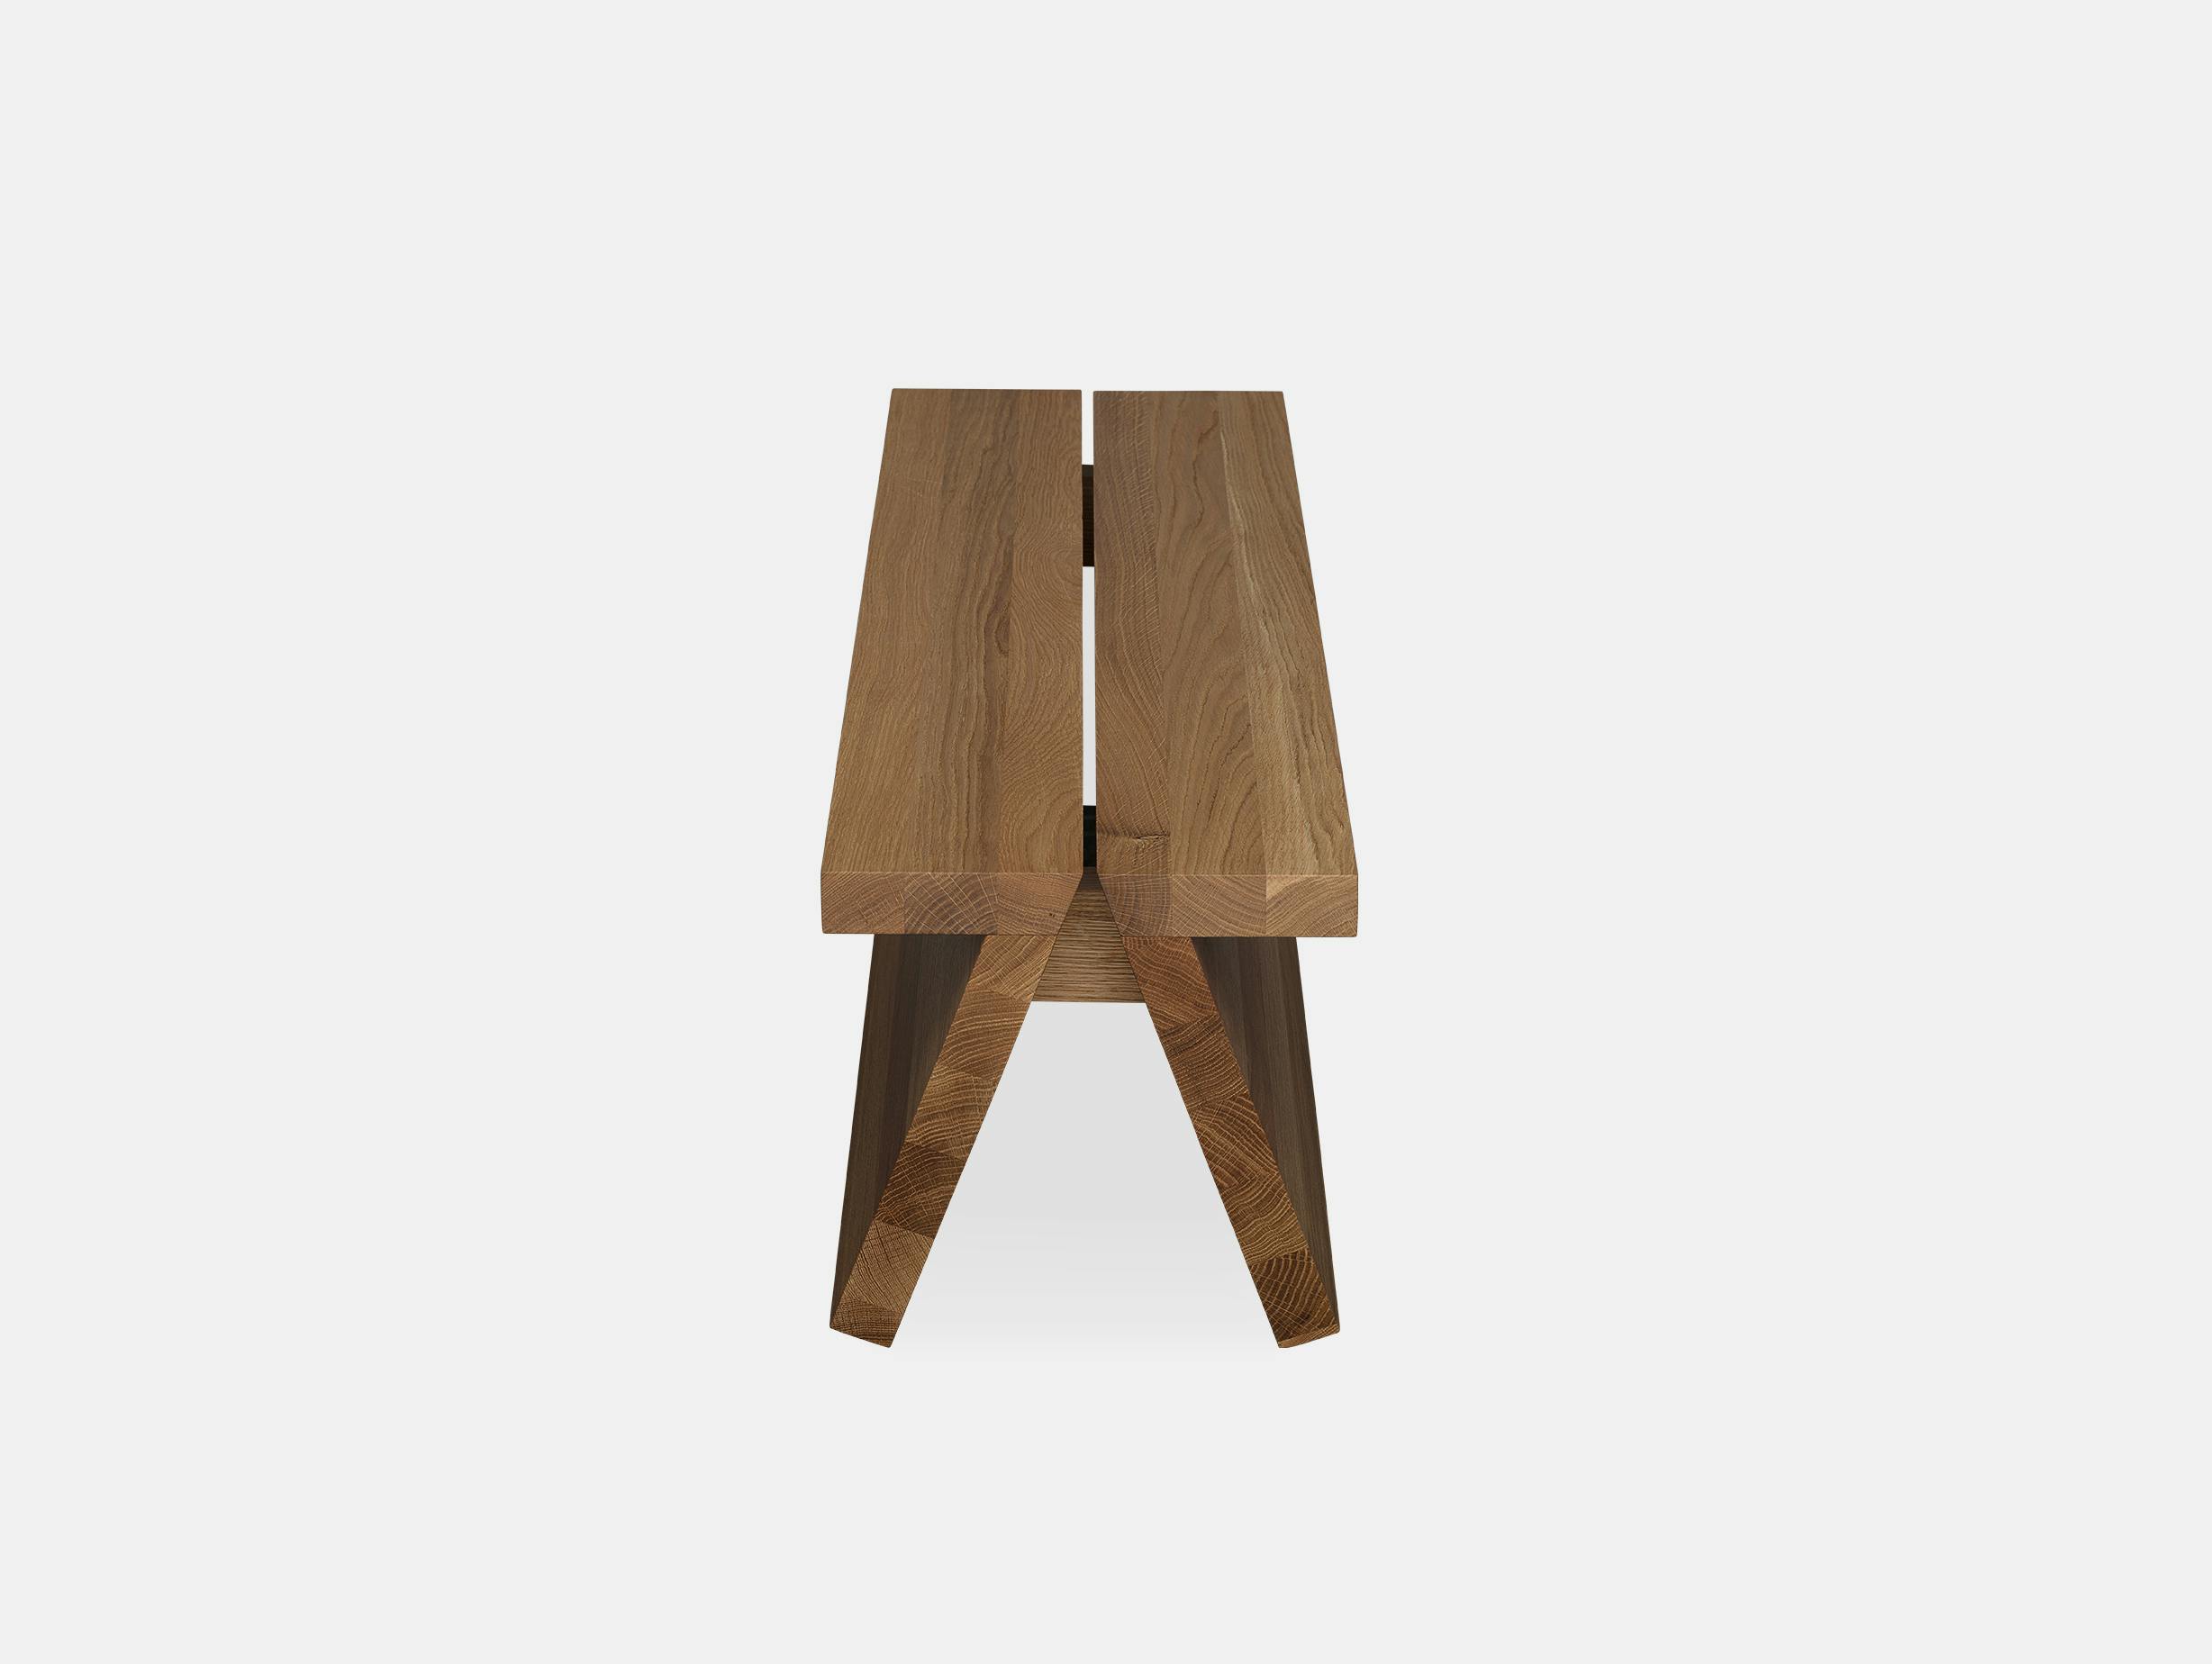 Fogia supersolid object 3 oak bench 3